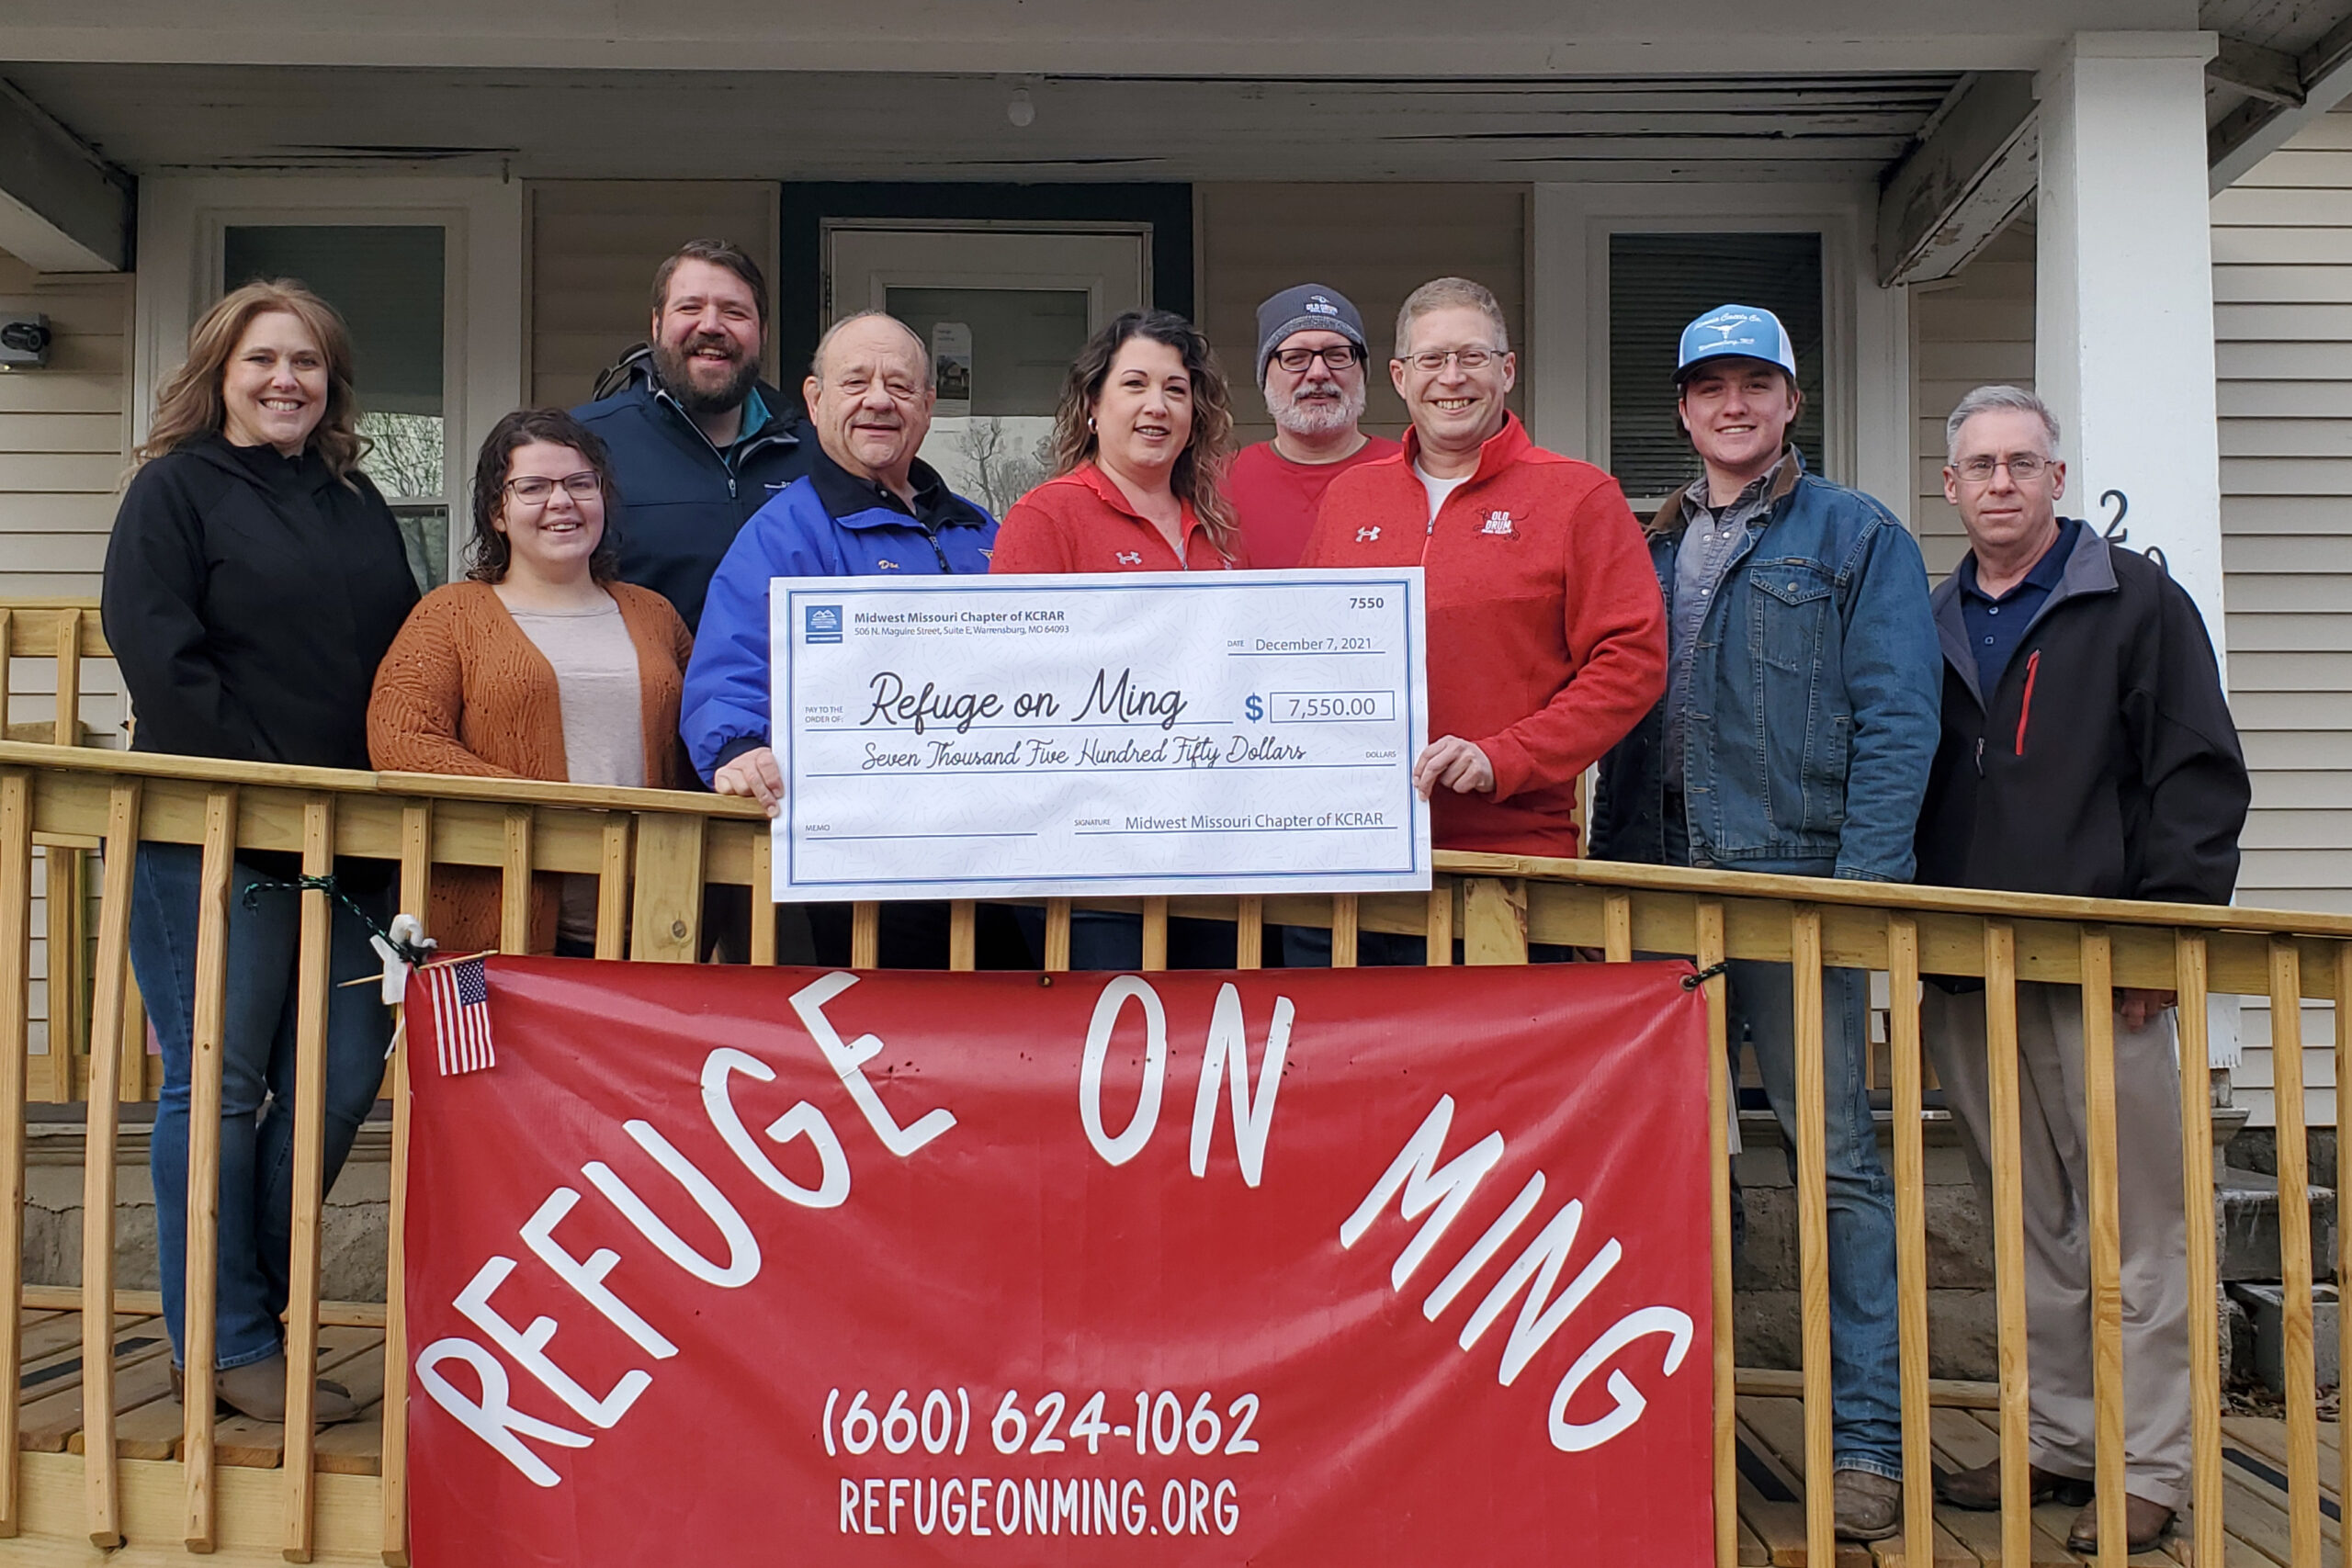 Image description: Members of the Midwest Missouri Chapter present Refuge on Ming with a donation check of $7,550.